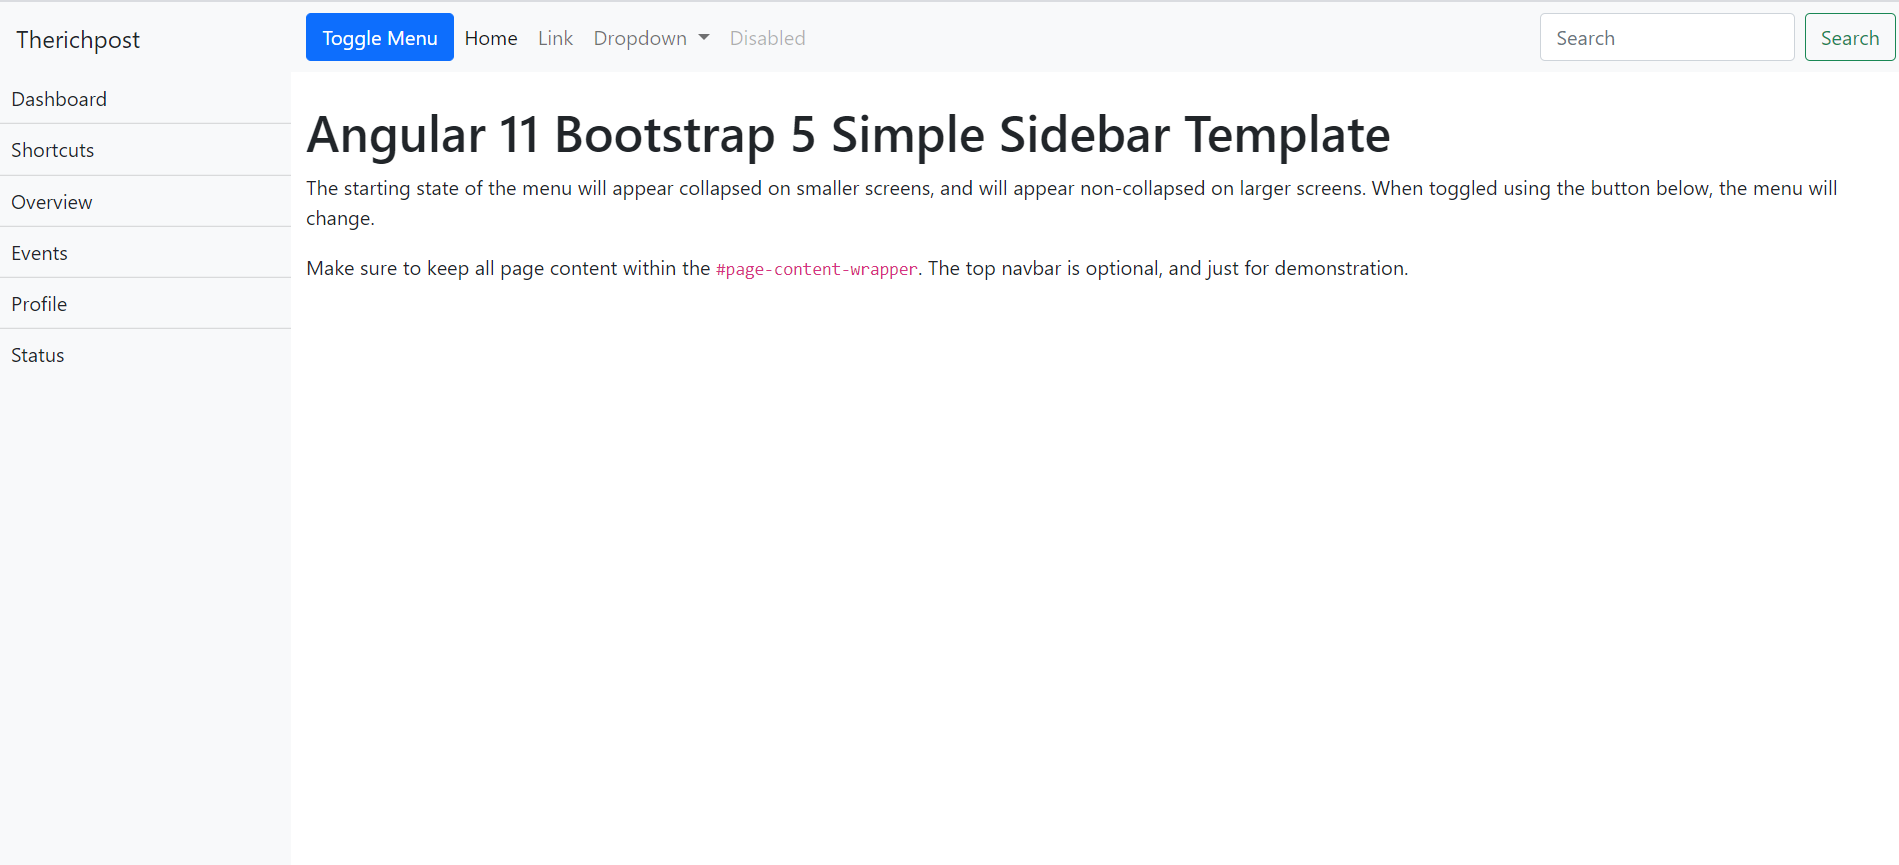 How to make simple sidebar template with Bootstrap 5 and Angular 11?